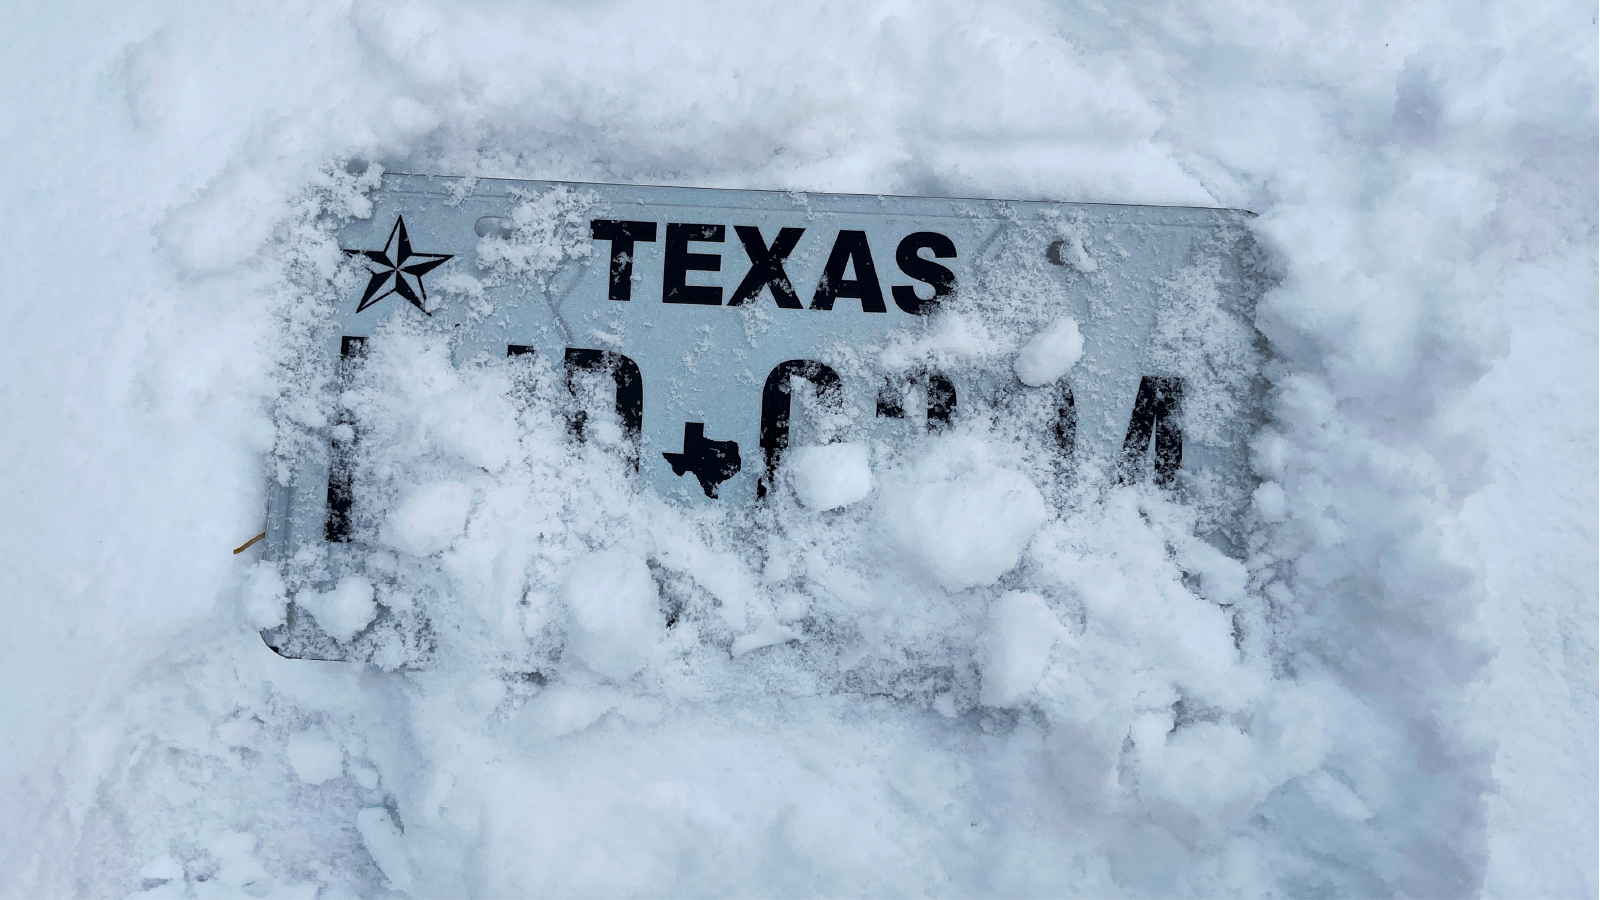 Texas number plate covered in snow